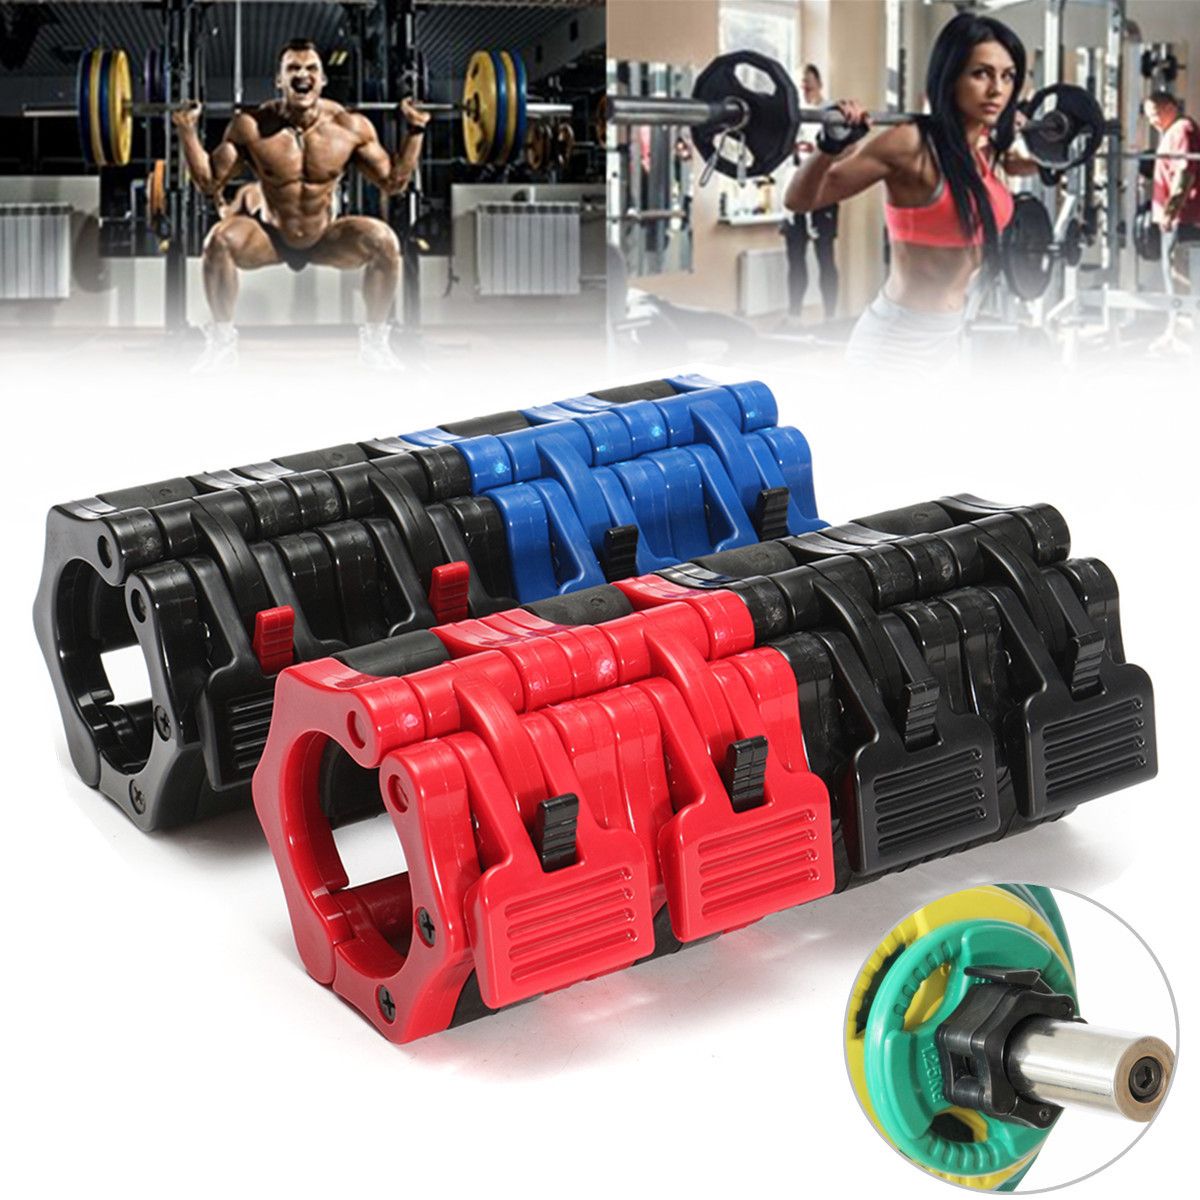 2Pcs-Nylon-Dumbbell-Barbell-Bar-Spinlock-Collars-Clips-Weight-Clamps-Training-1263716